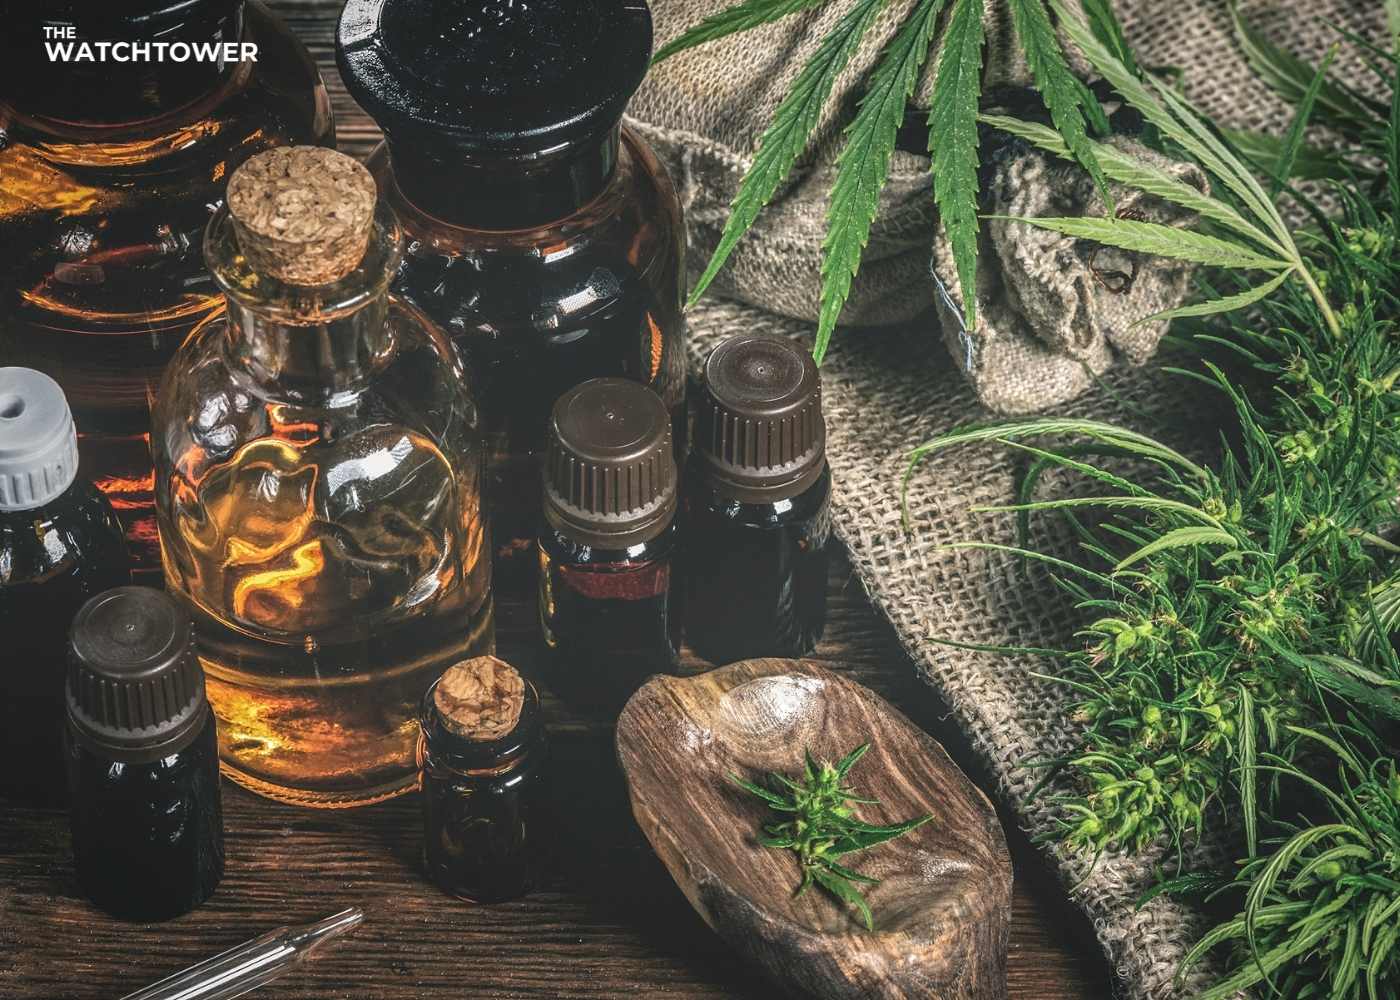 CBD Oil Vs. Tincture - What's The Difference?